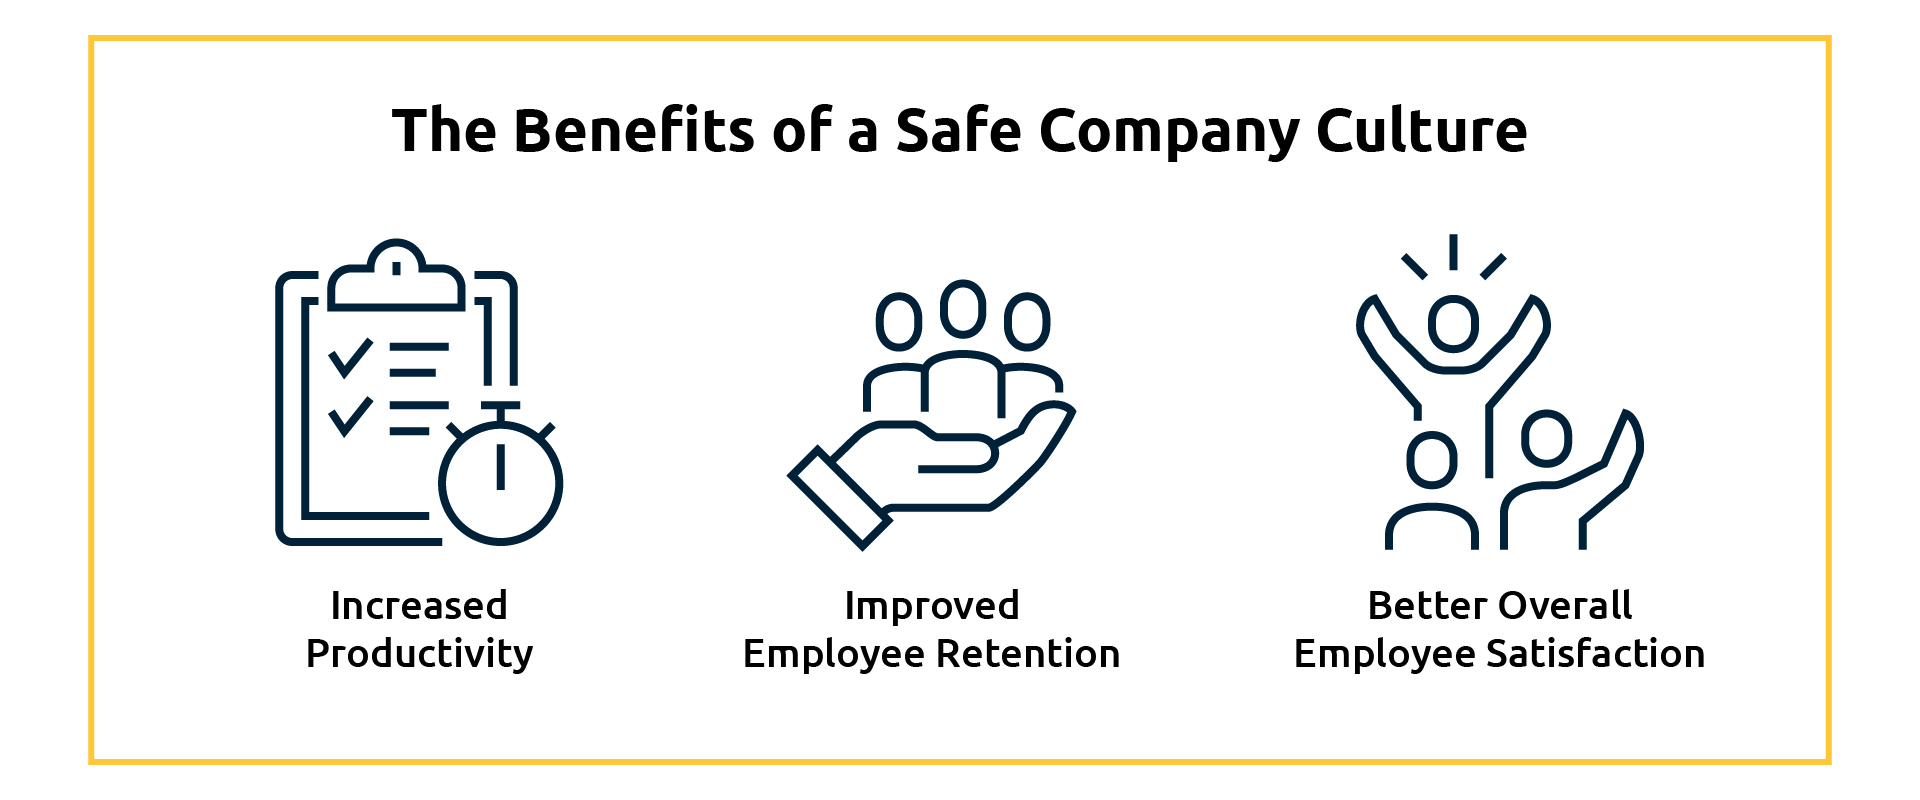 The Benefits of corporate security services graphic